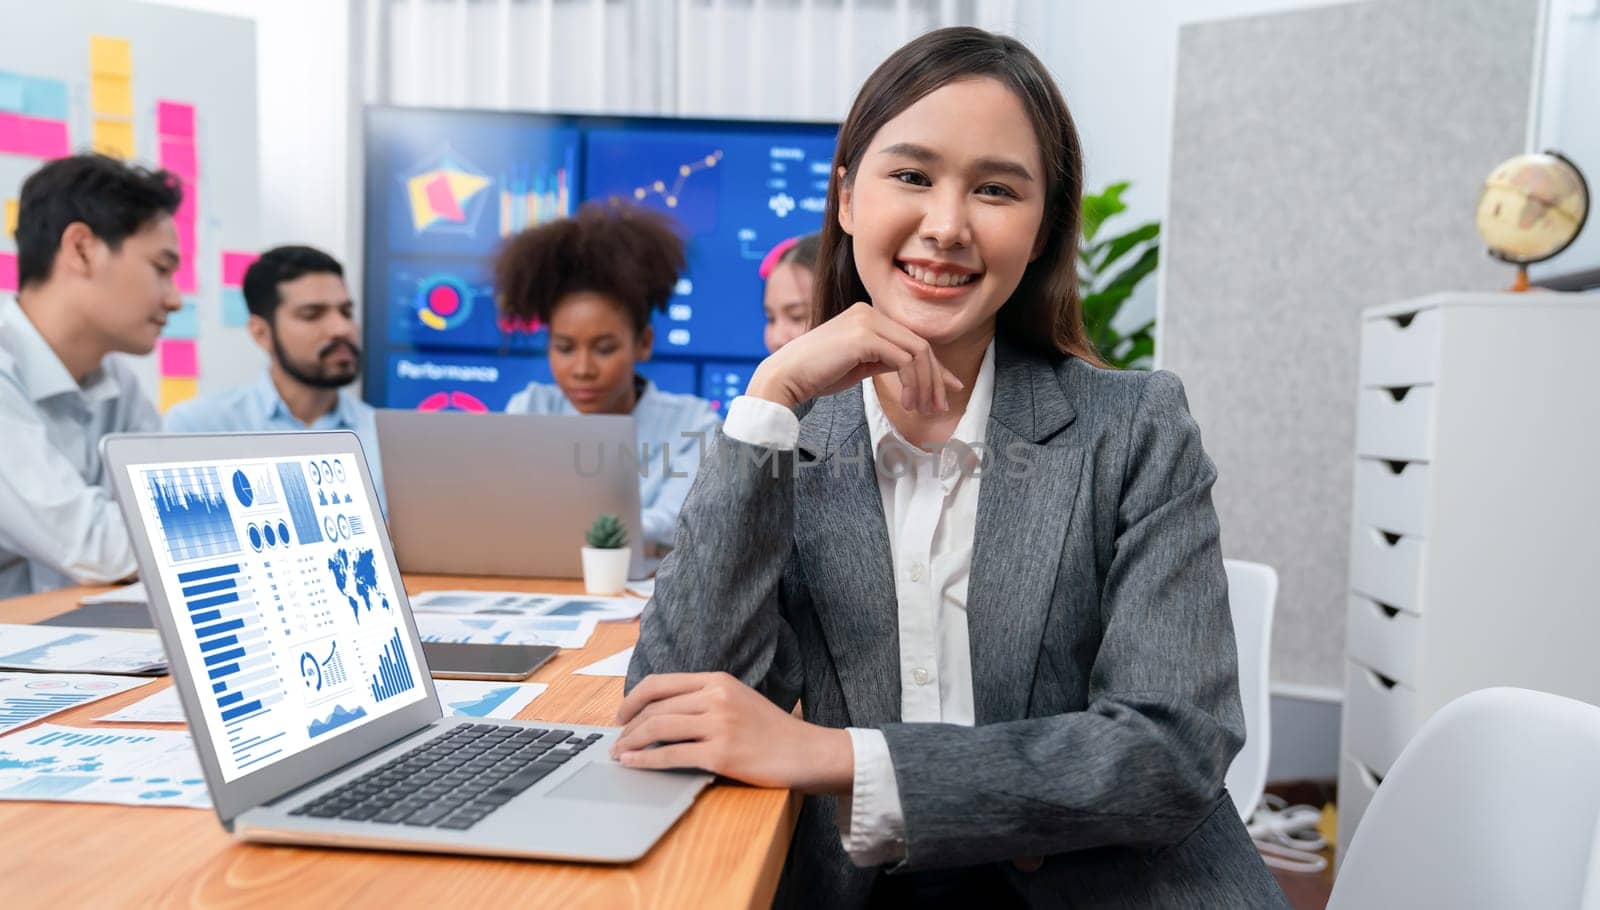 Portrait of happy young asian businesswoman with group of office worker on meeting with screen display business dashboard in background. Confident office lady at team meeting. Concord